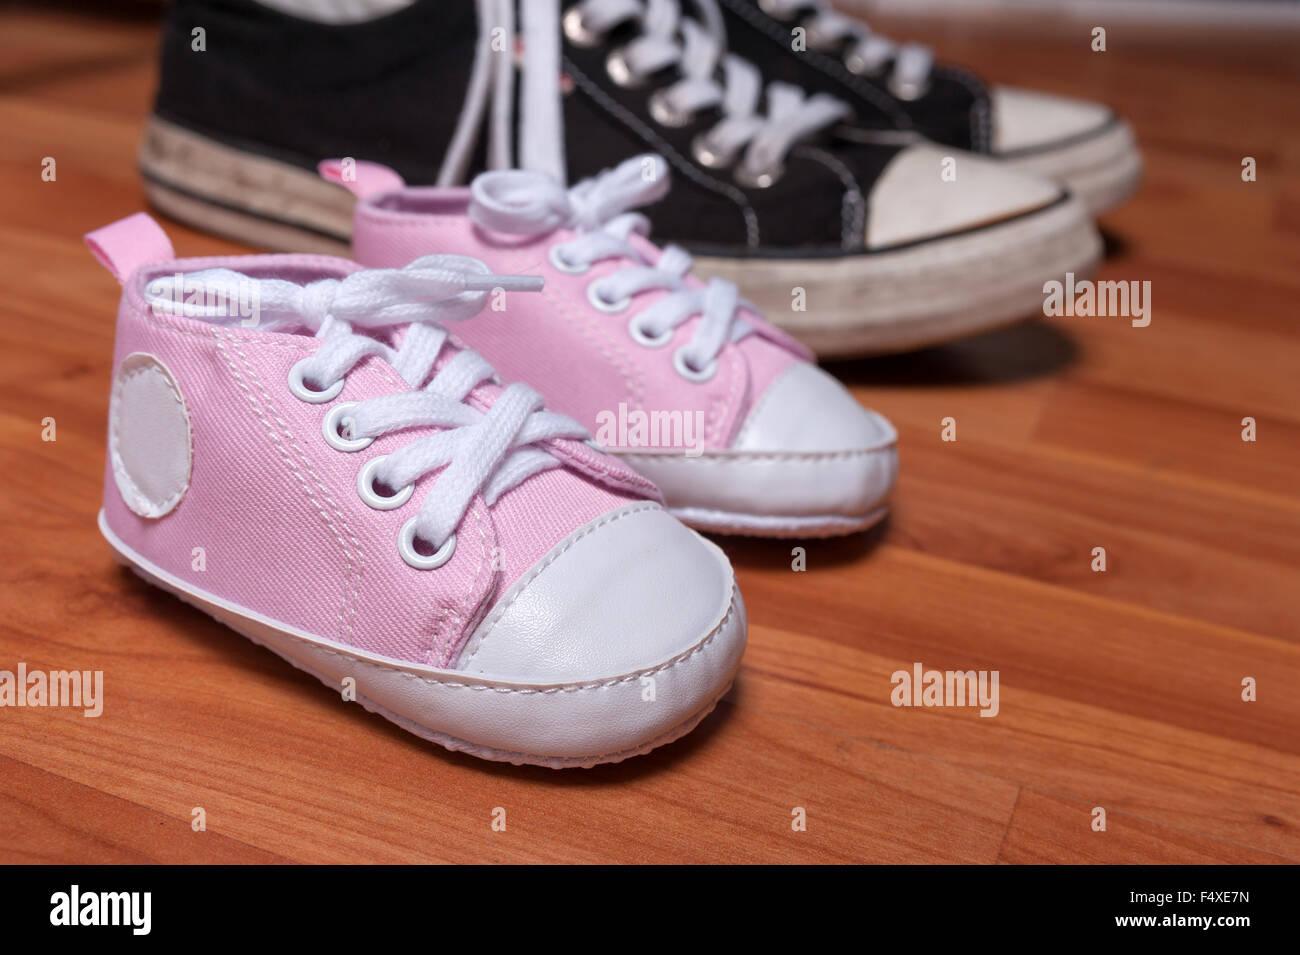 Cute pink baby girl sneakers and pair of adult sneakers Stock Photo